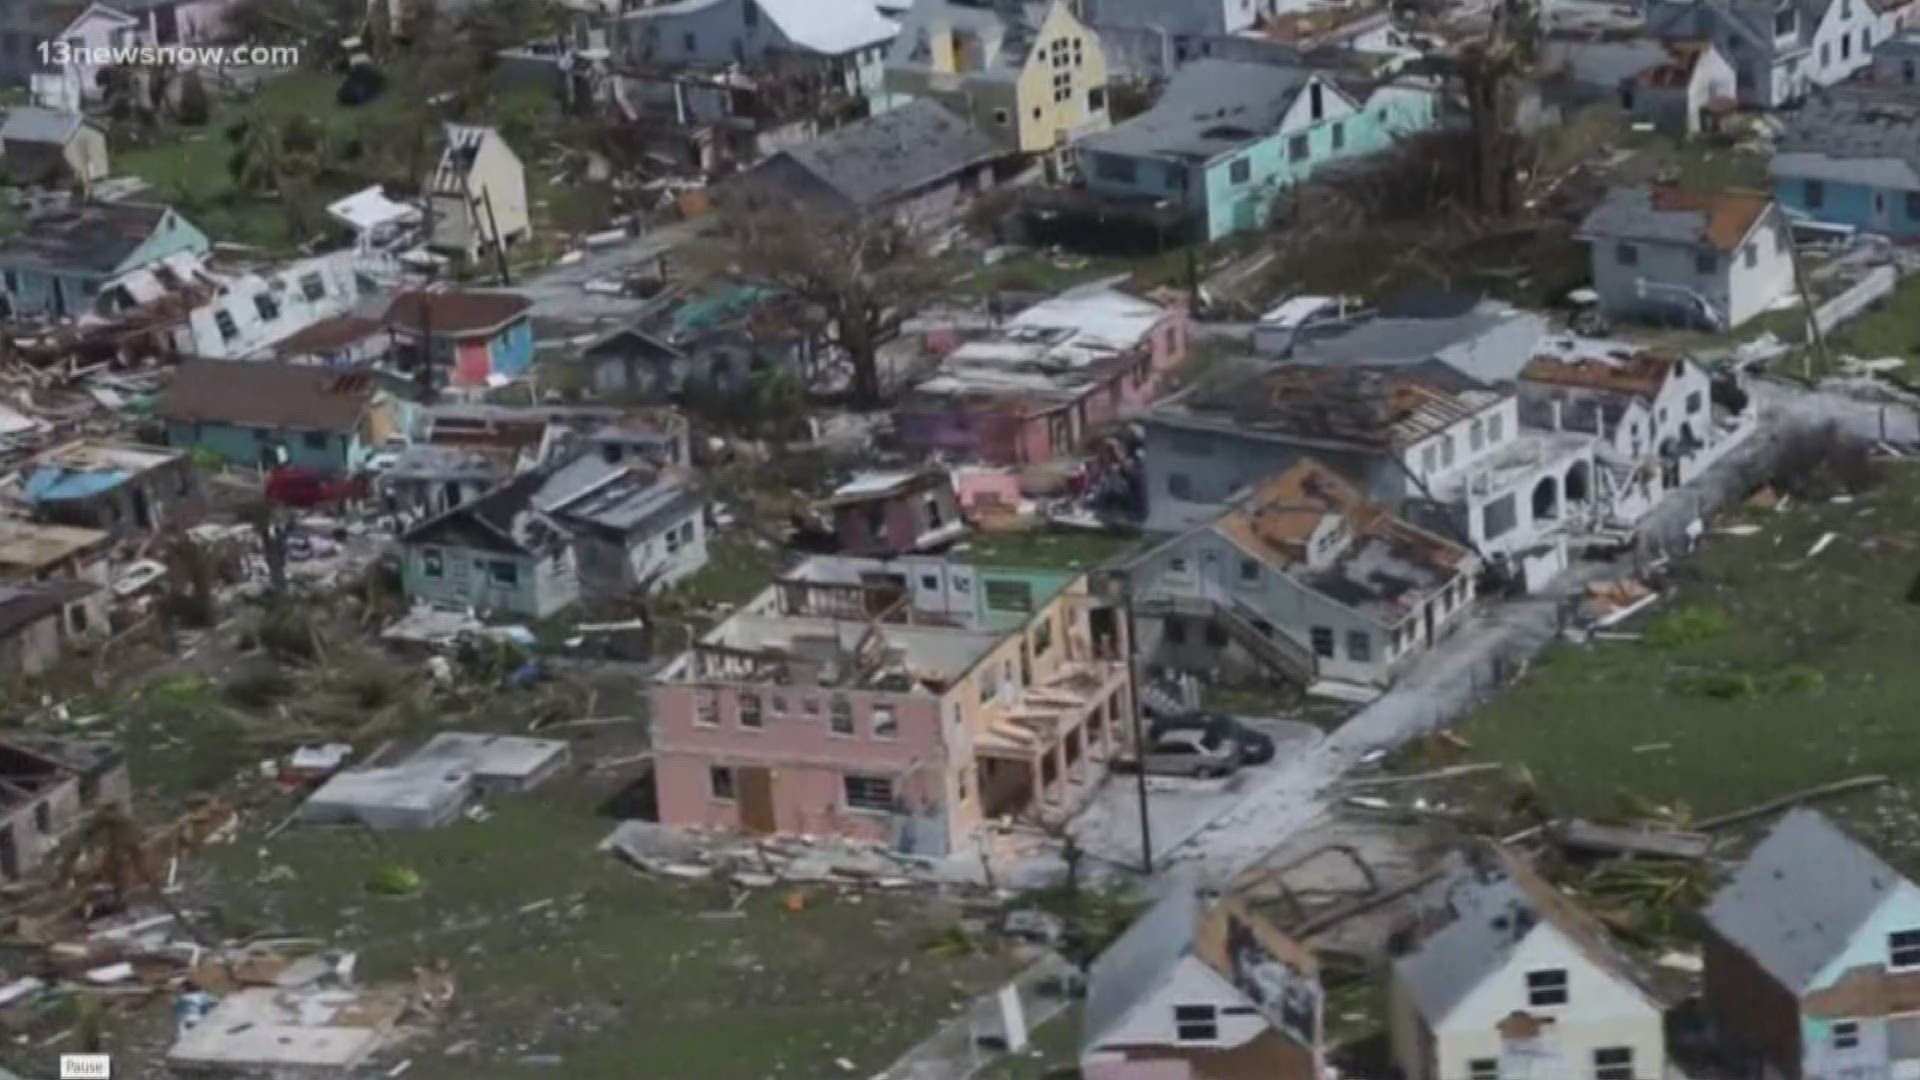 The Franklin Johnston Group, from Virginia Beach, is collecting clothing to donate to Bahamians who survived Hurricane Dorian. The groups said they were motivated to help after seeing the catastrophic damage on the islands.